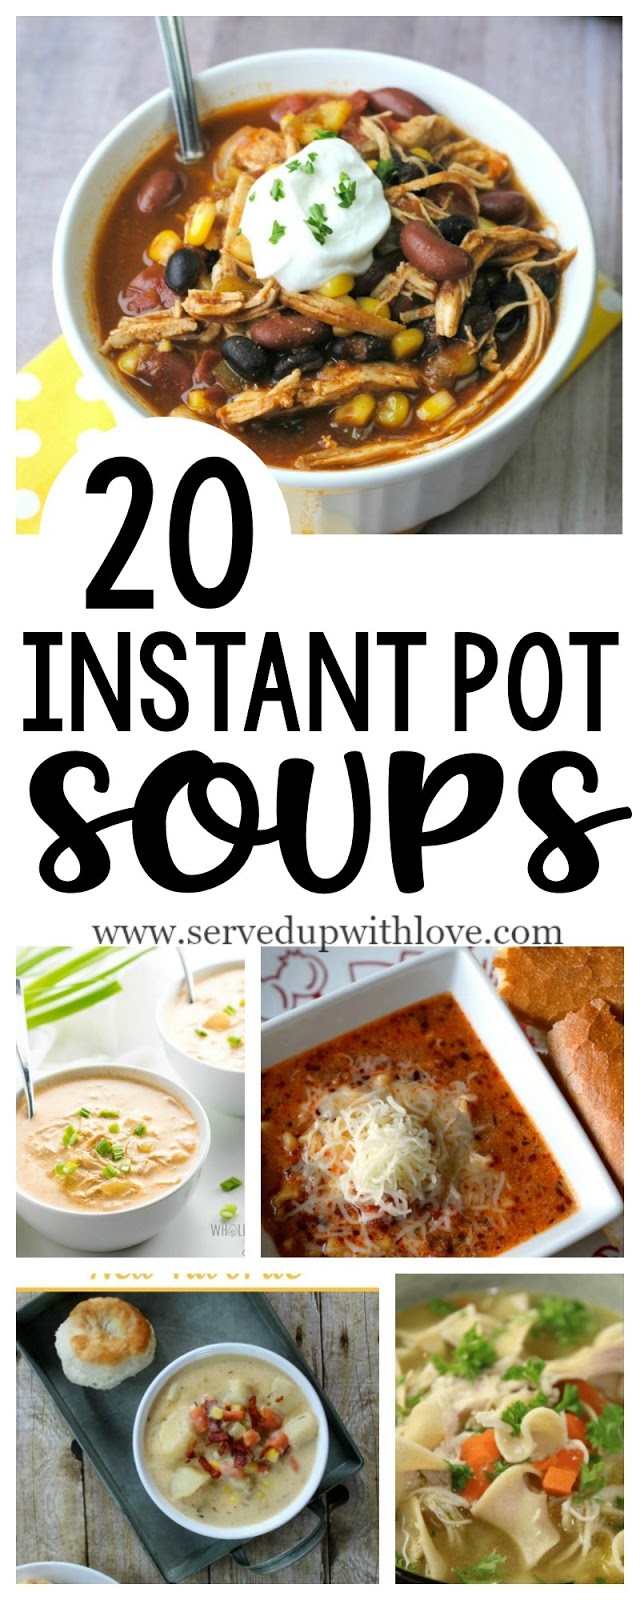 Served Up With Love: 20 Instant Pot Soups